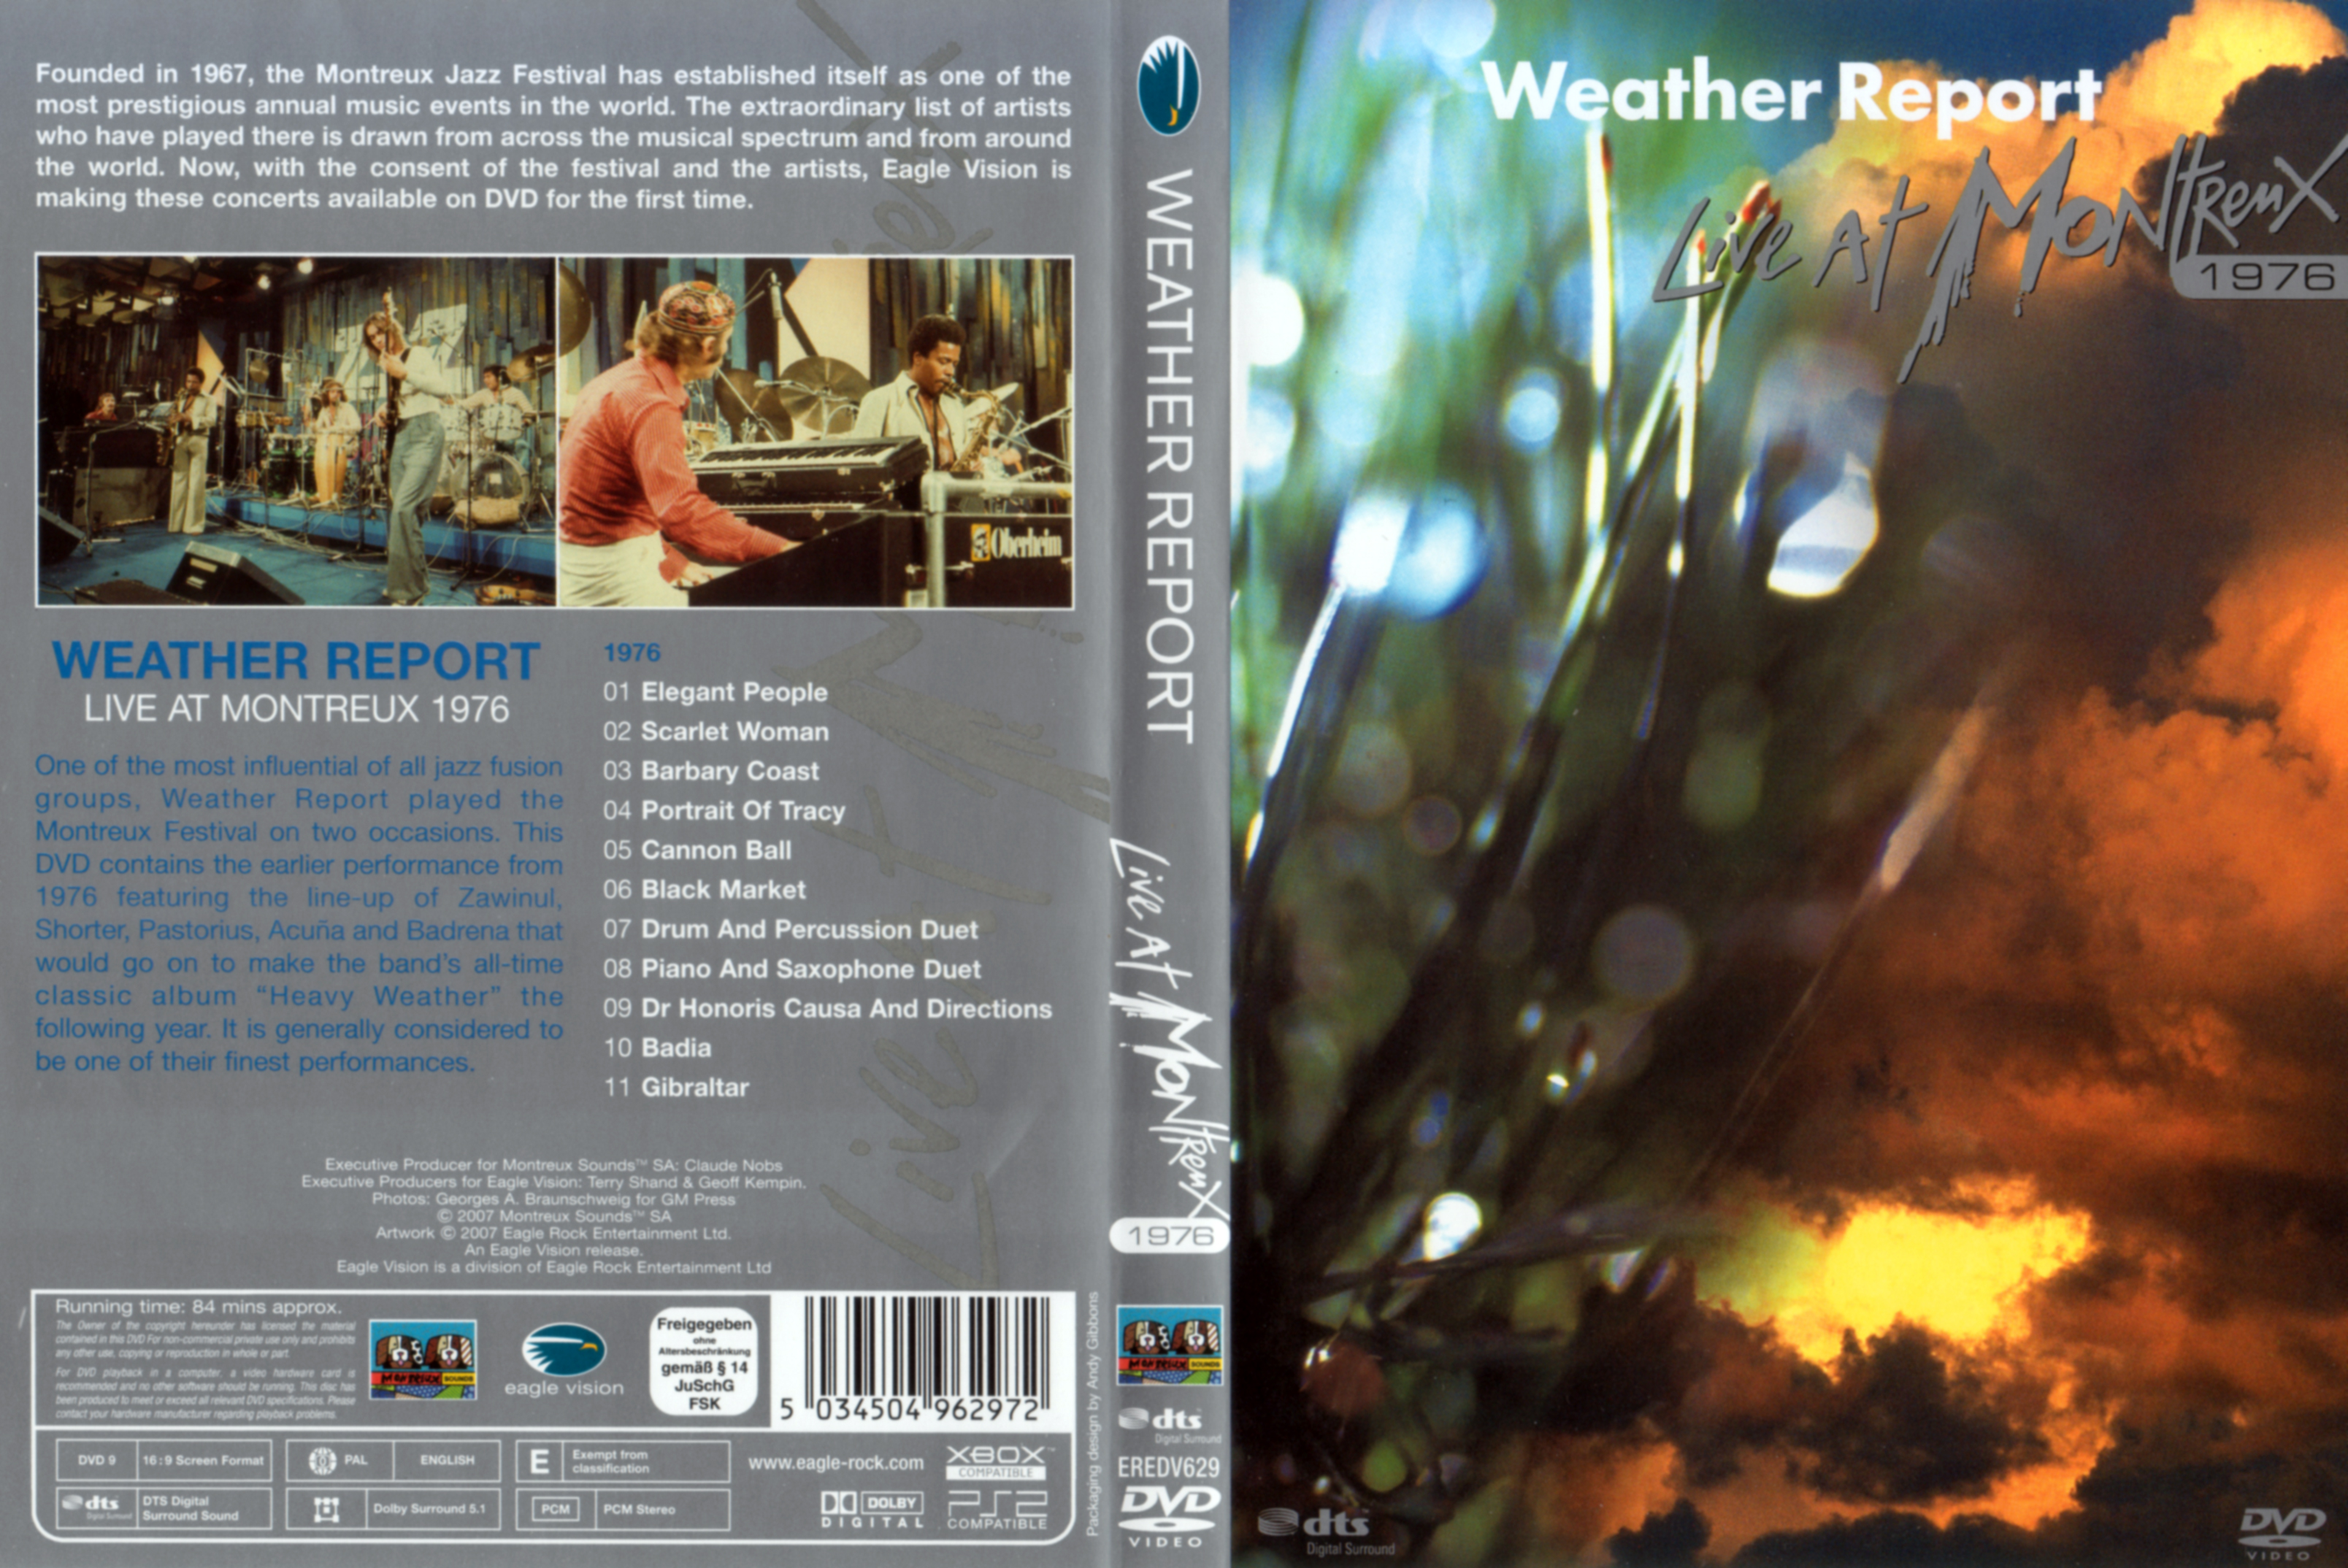 Jaquette DVD Weather Report Live at Montreux 1976